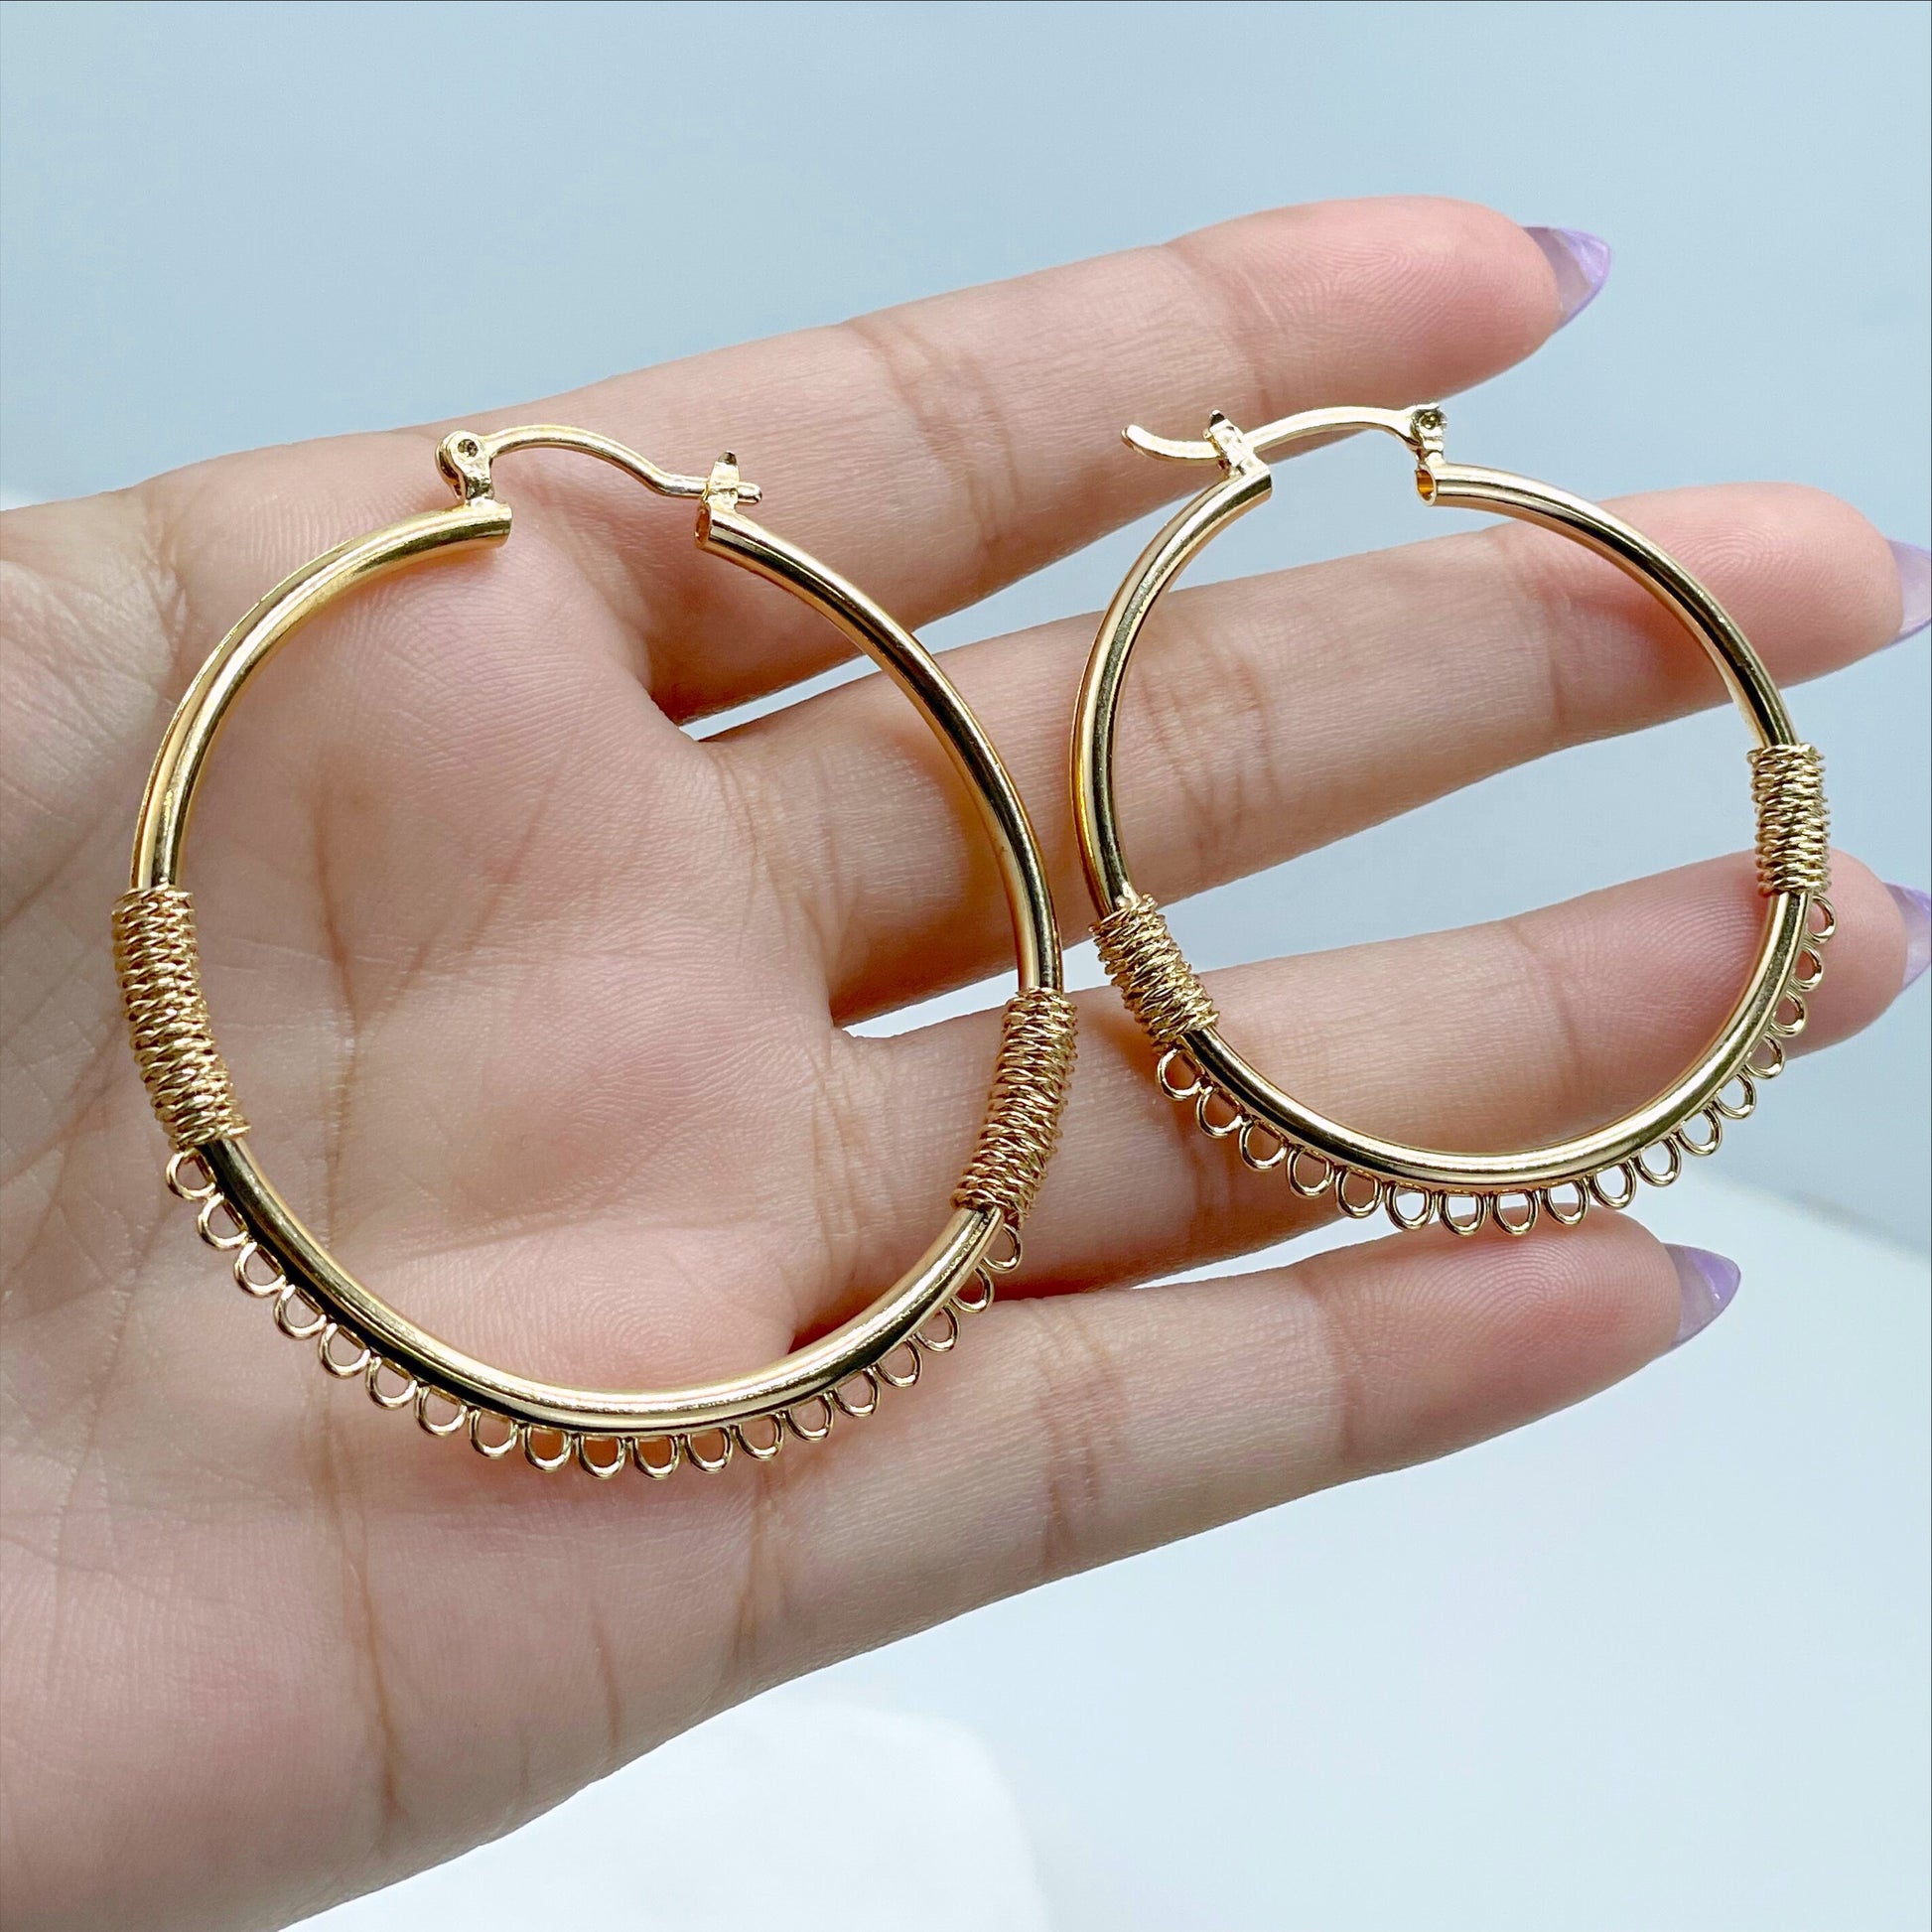 18k Gold Filled 42mm or 50mm Textured Rolled, Hoops 4mm Thickness, Handmade Earrings Wholesale Jewelry Making Supplies